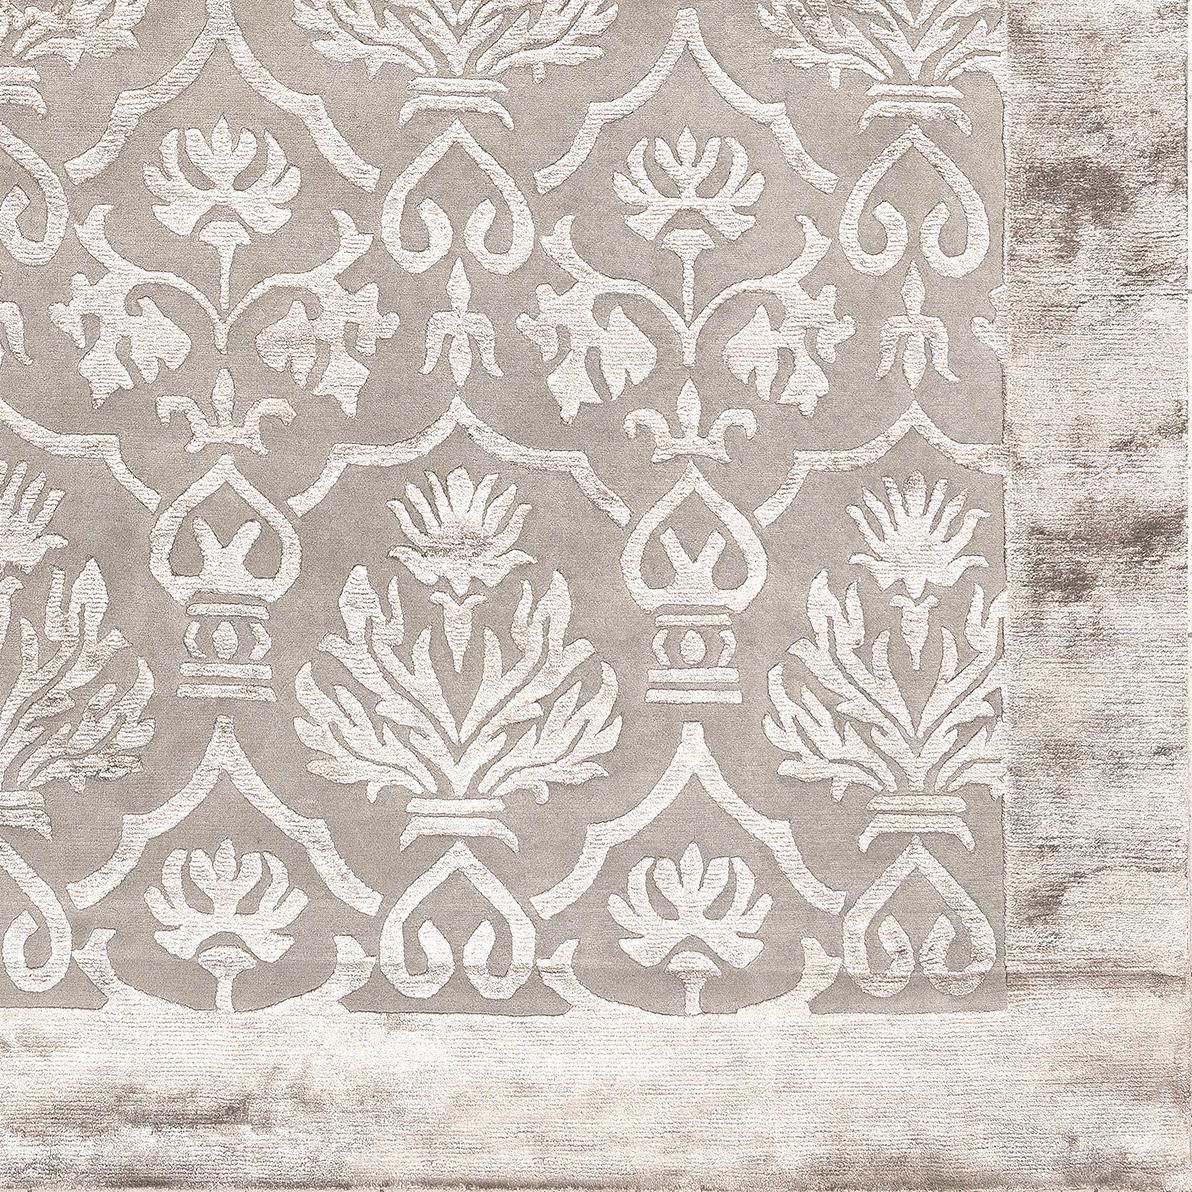 Classic design inspired to antique Fine Middle Eastern damask rugs from Illulian's Palace Collection.
This rug is hand knotted in Nepal by our artisans by using 50% silk and 50% fine Himalayan wool dyed using vegetable and mineral pigments. The base